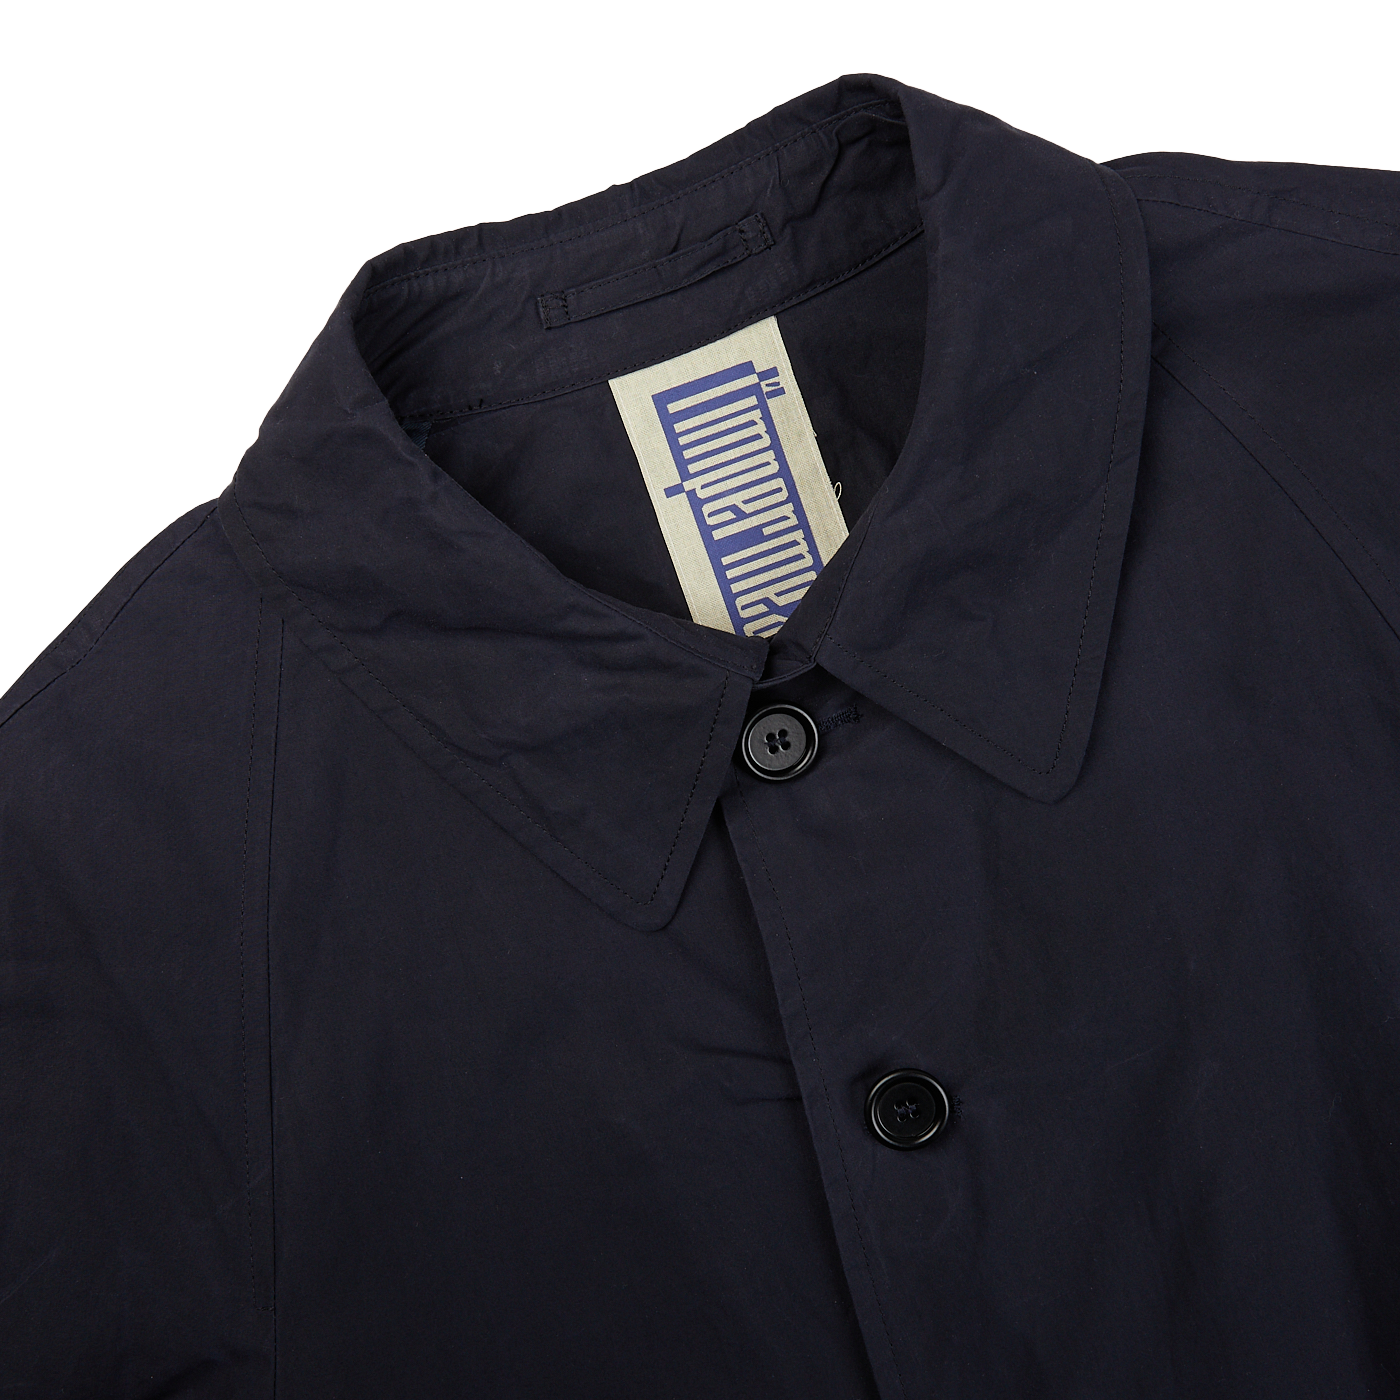 A close up of a L'Impermeabile navy blue waxed cotton Kamikaze trenchcoat on a white background.